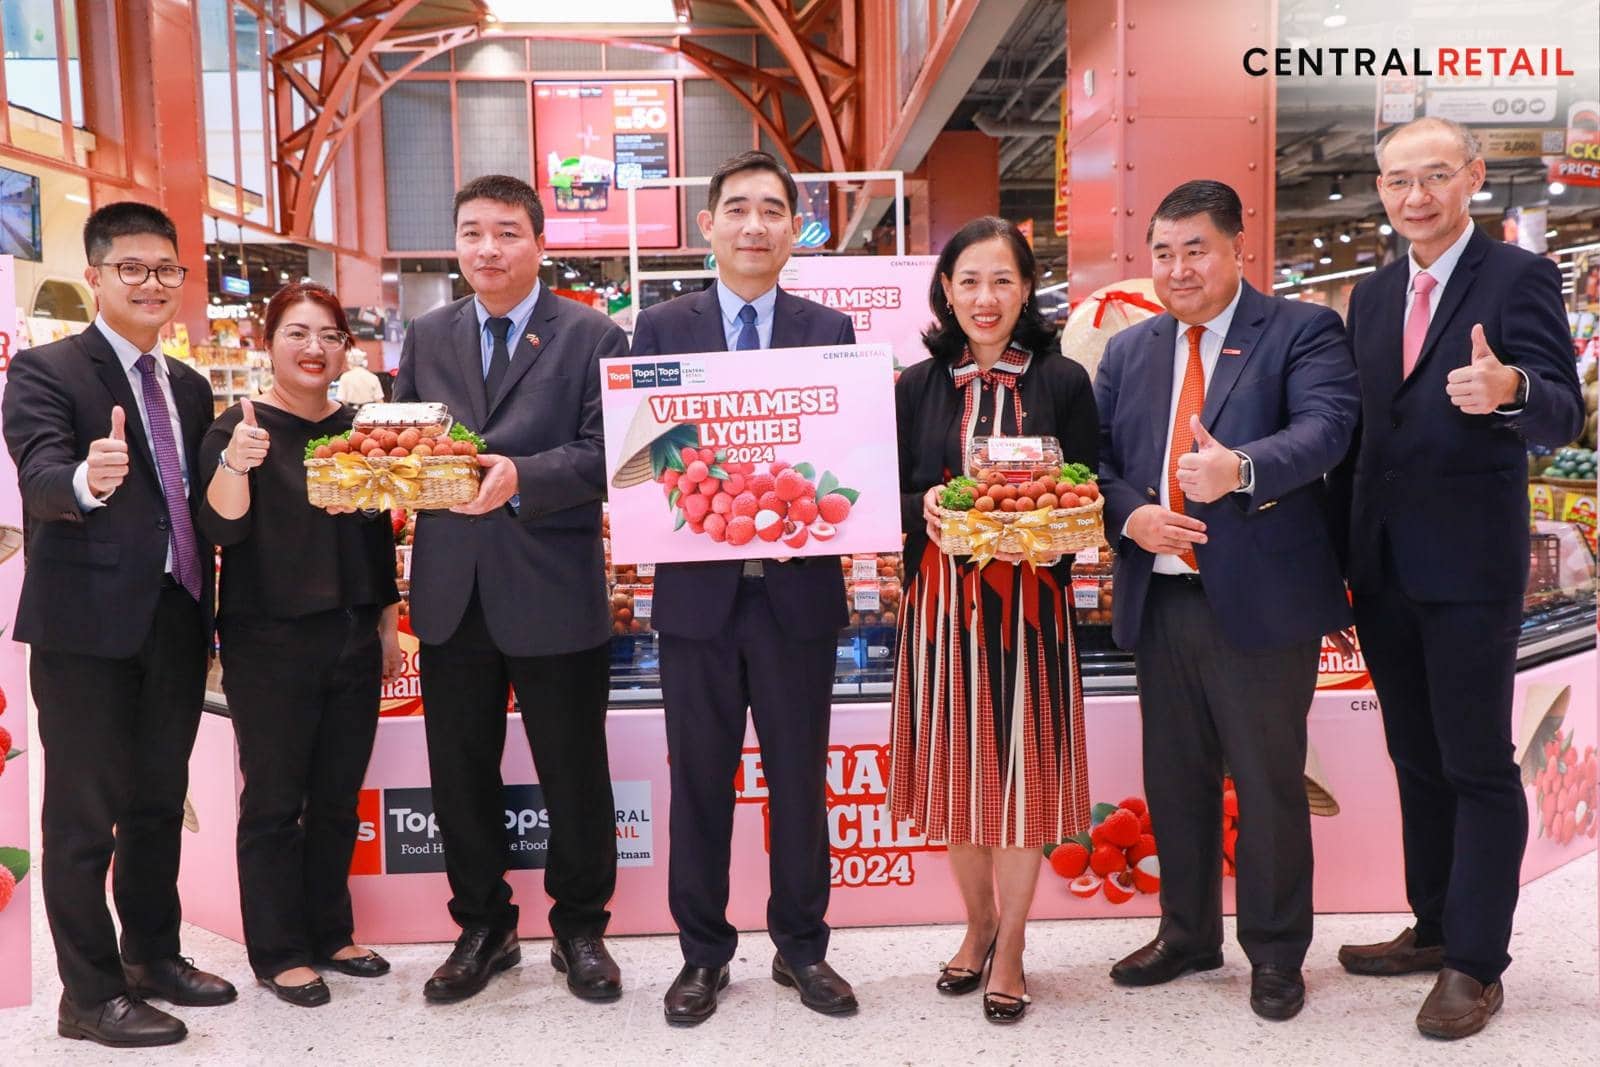 Central Retail organized an event at Tops Food Hall to promote Vietnamese lychees at Tops Food Hall